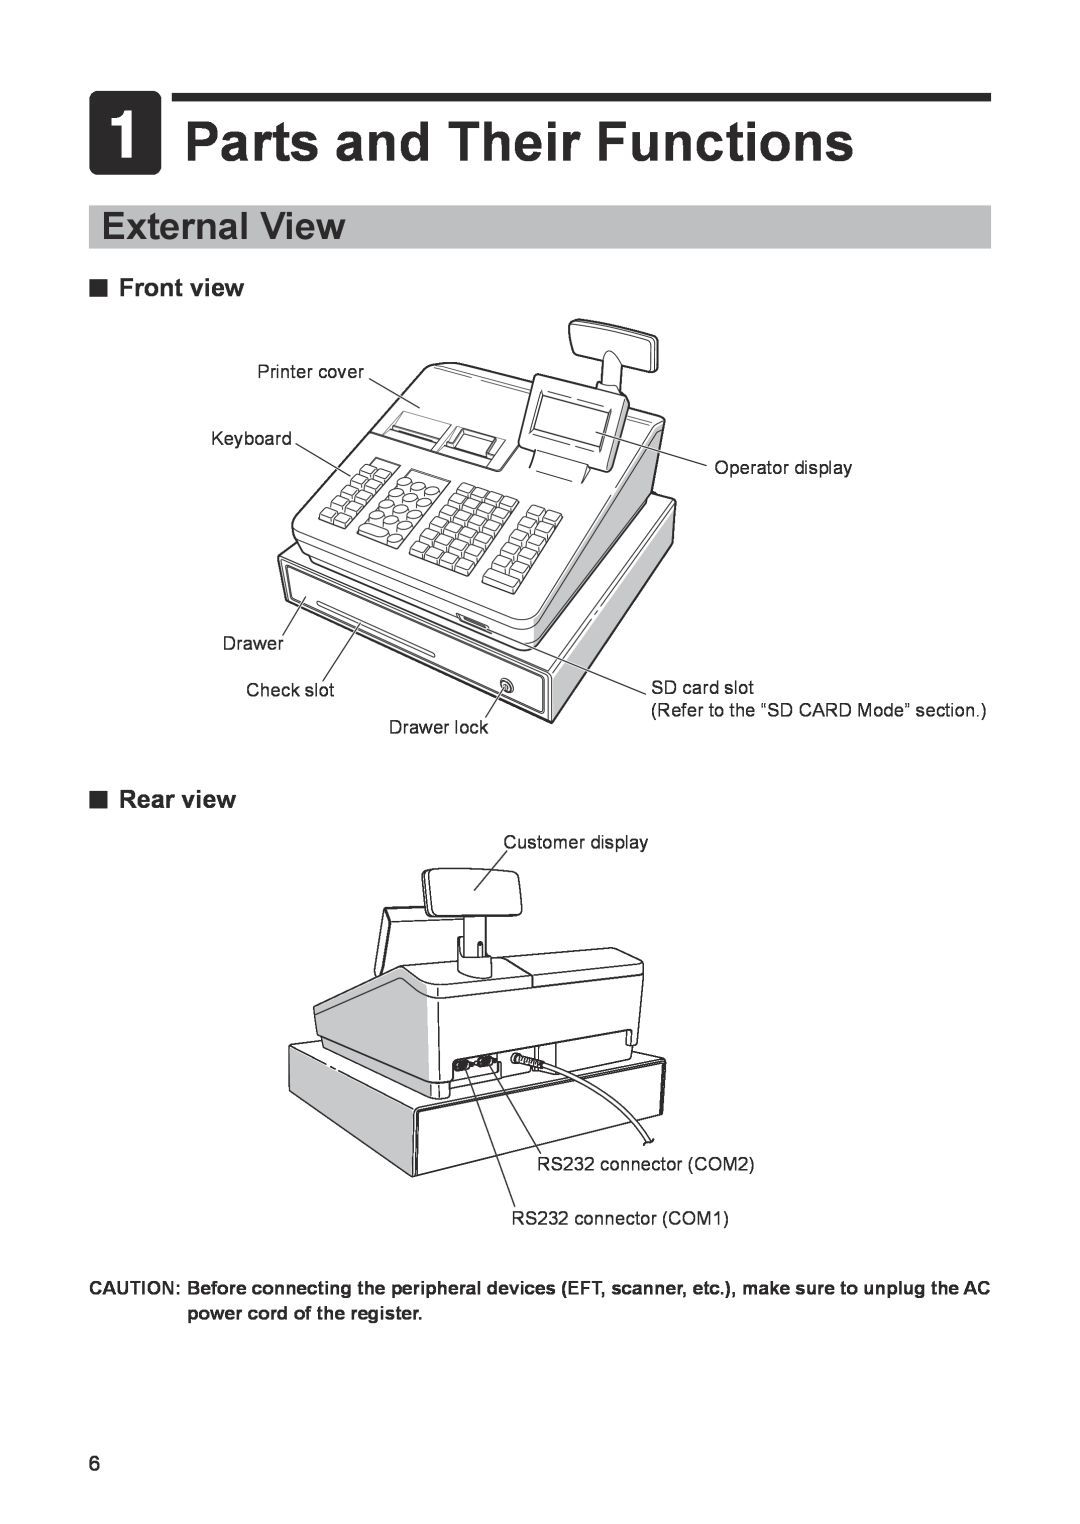 Sharp ER-A347A instruction manual Parts and Their Functions, External View, Front view, Rear view 